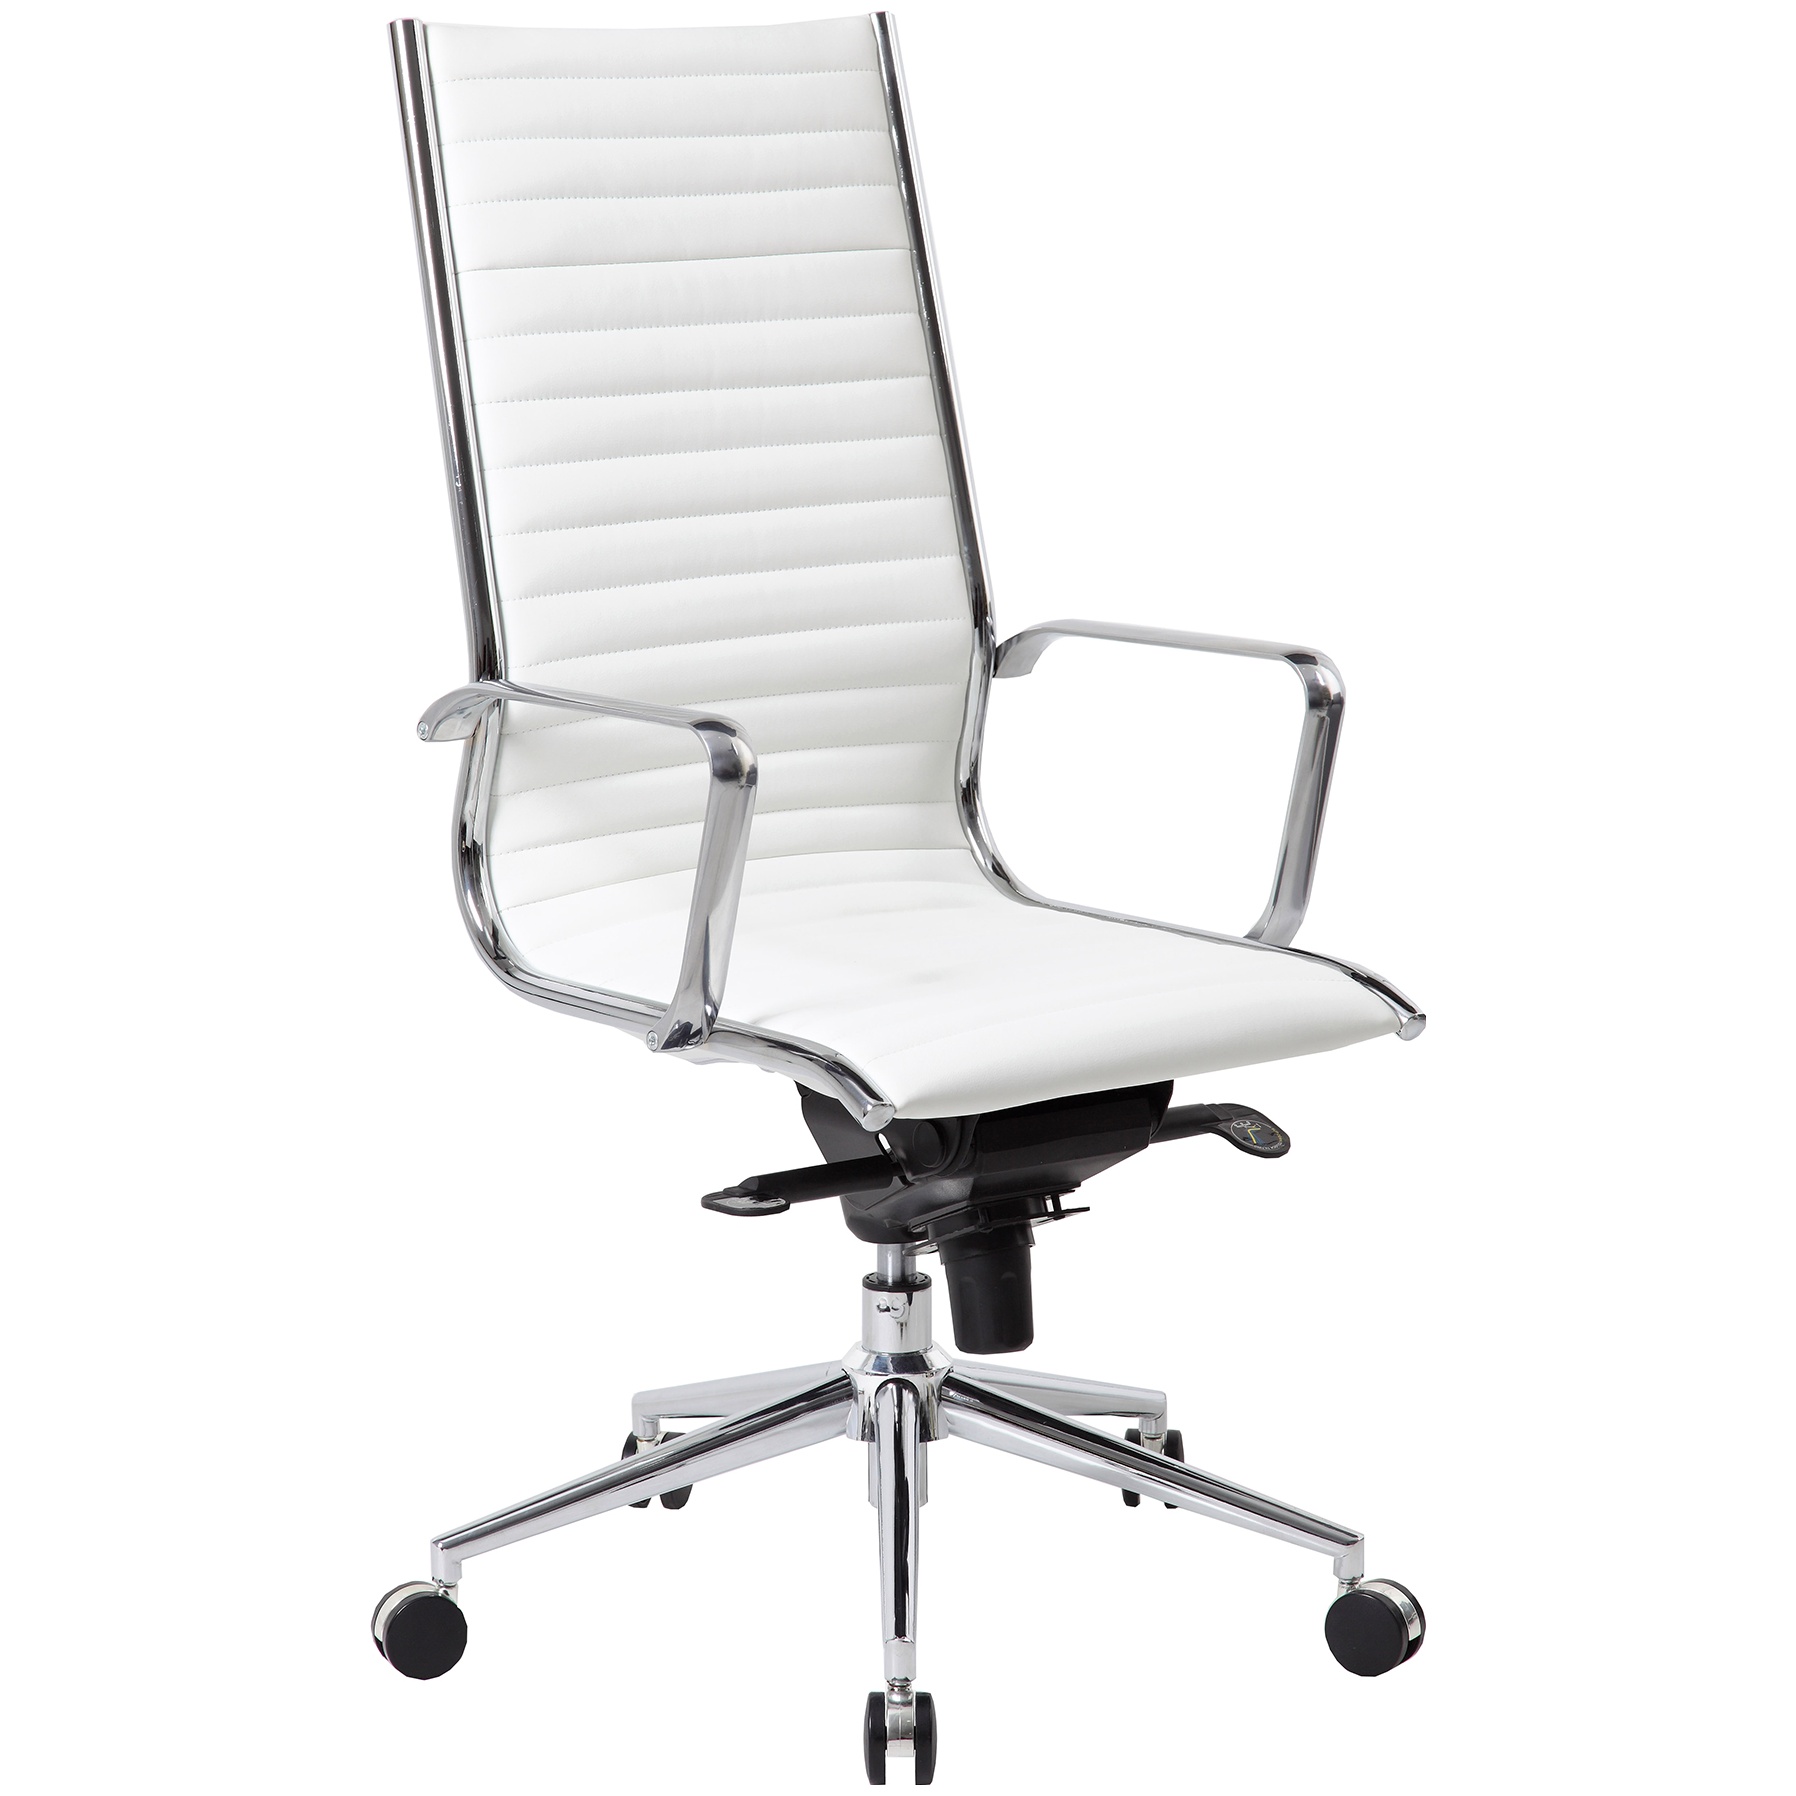 Abbey High Back White Leather Office Chair | Executive ...